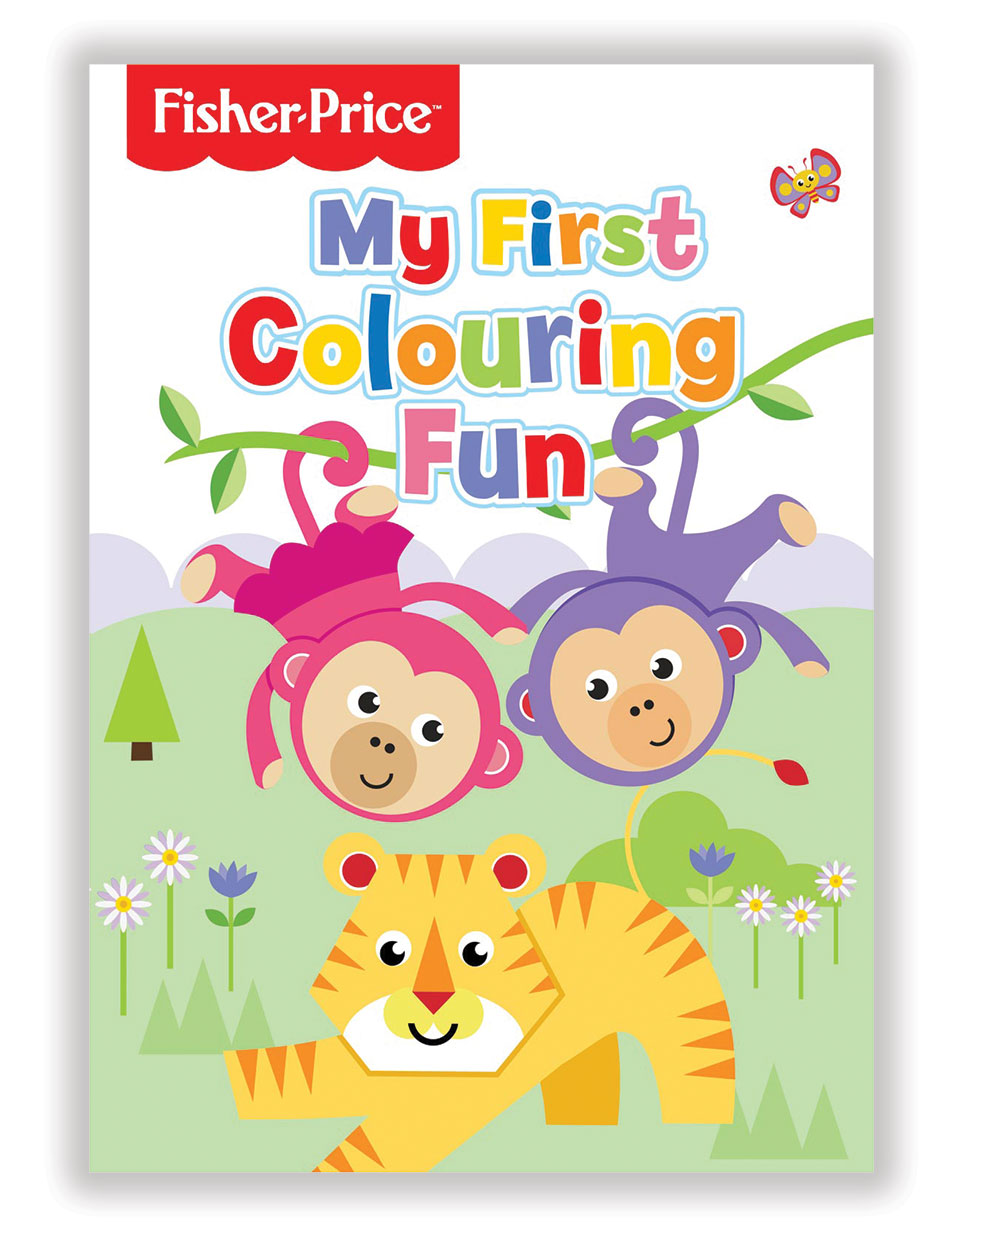 Fisher Price my first colouring book front cover featured on a white background